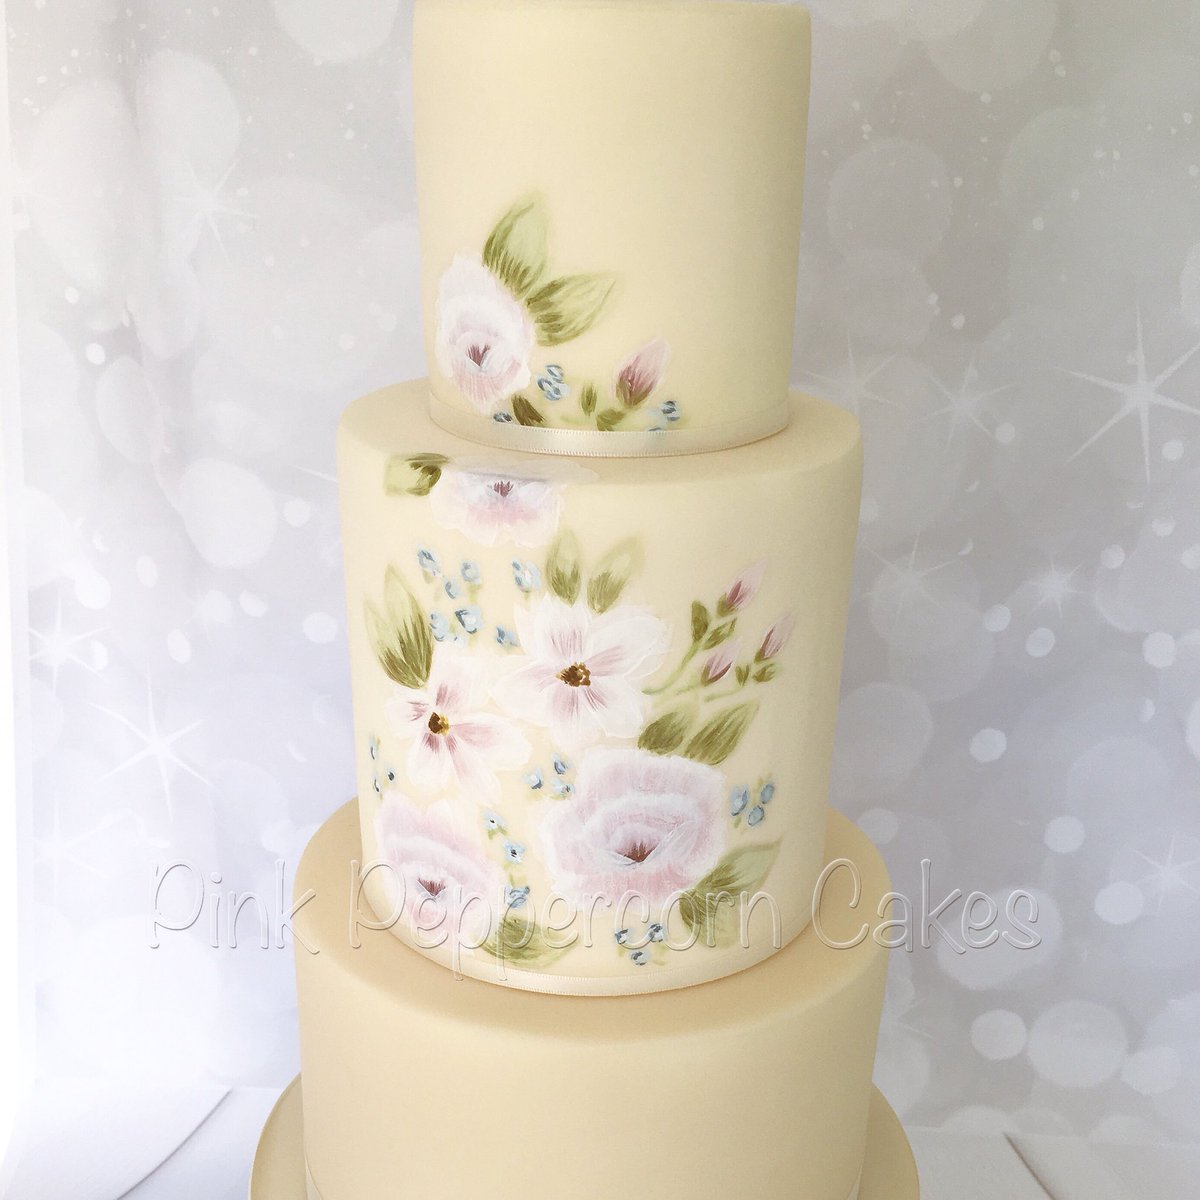 Painting on Cakes is really on trend, here’s one I made recently.  #weddingcakesdoncaster #paintedcake #cakedesigndoncaster #newcakebusinessdoncaster #pinkpeppercorncakes #doncasterisgreat